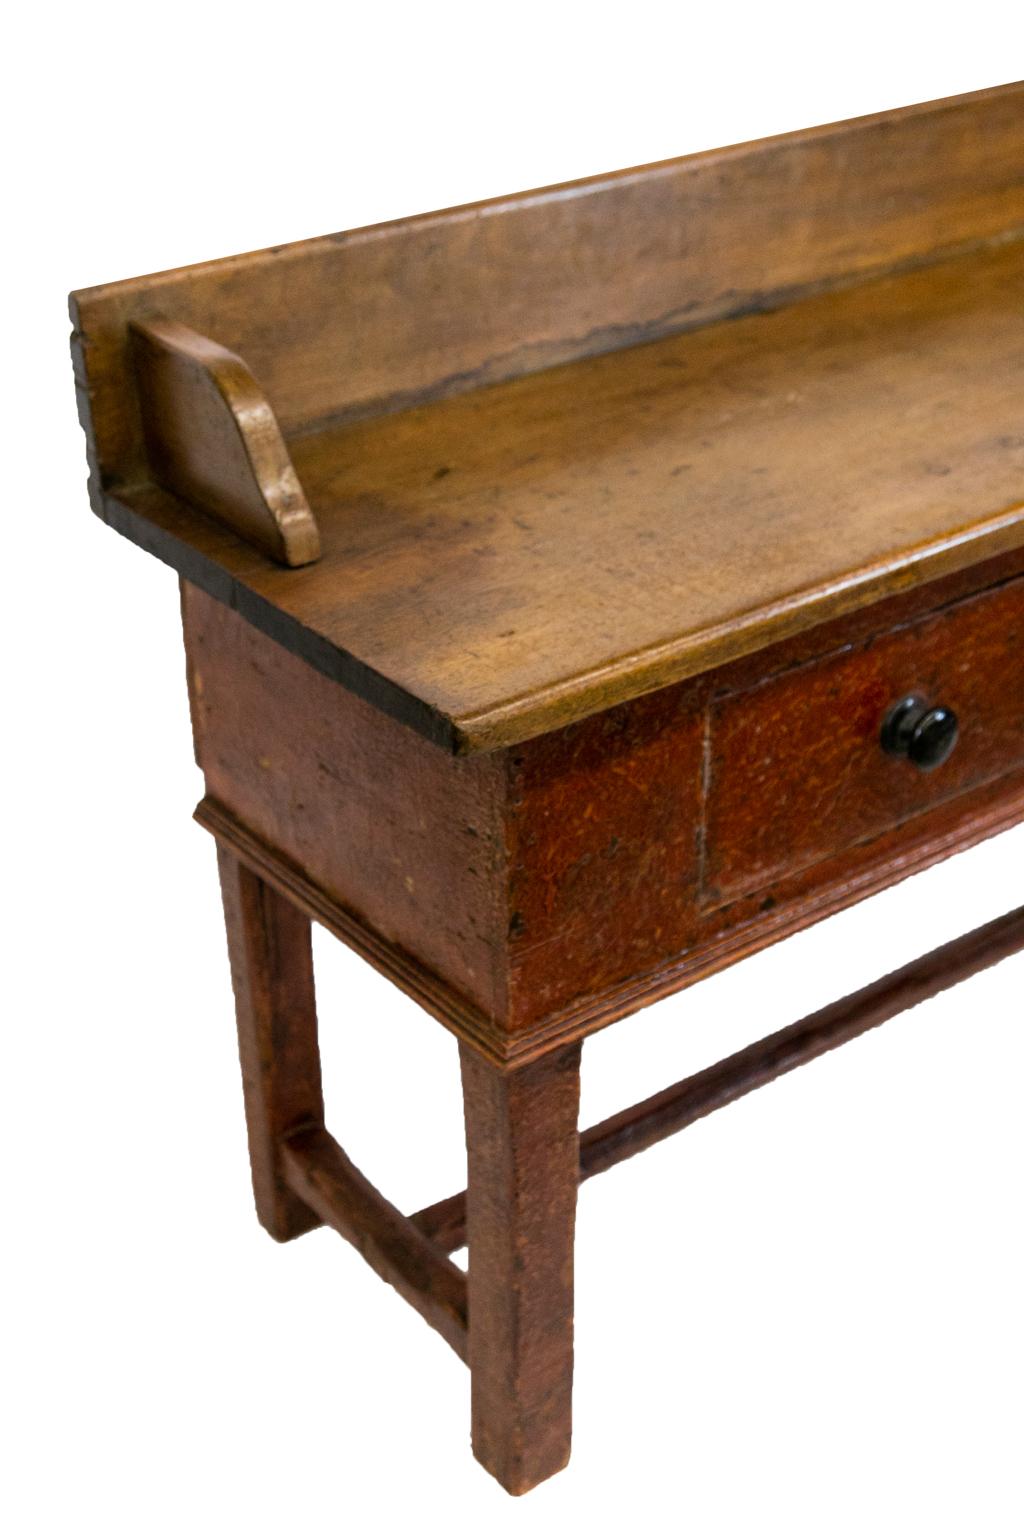 English Painted One-Drawer Serving Table